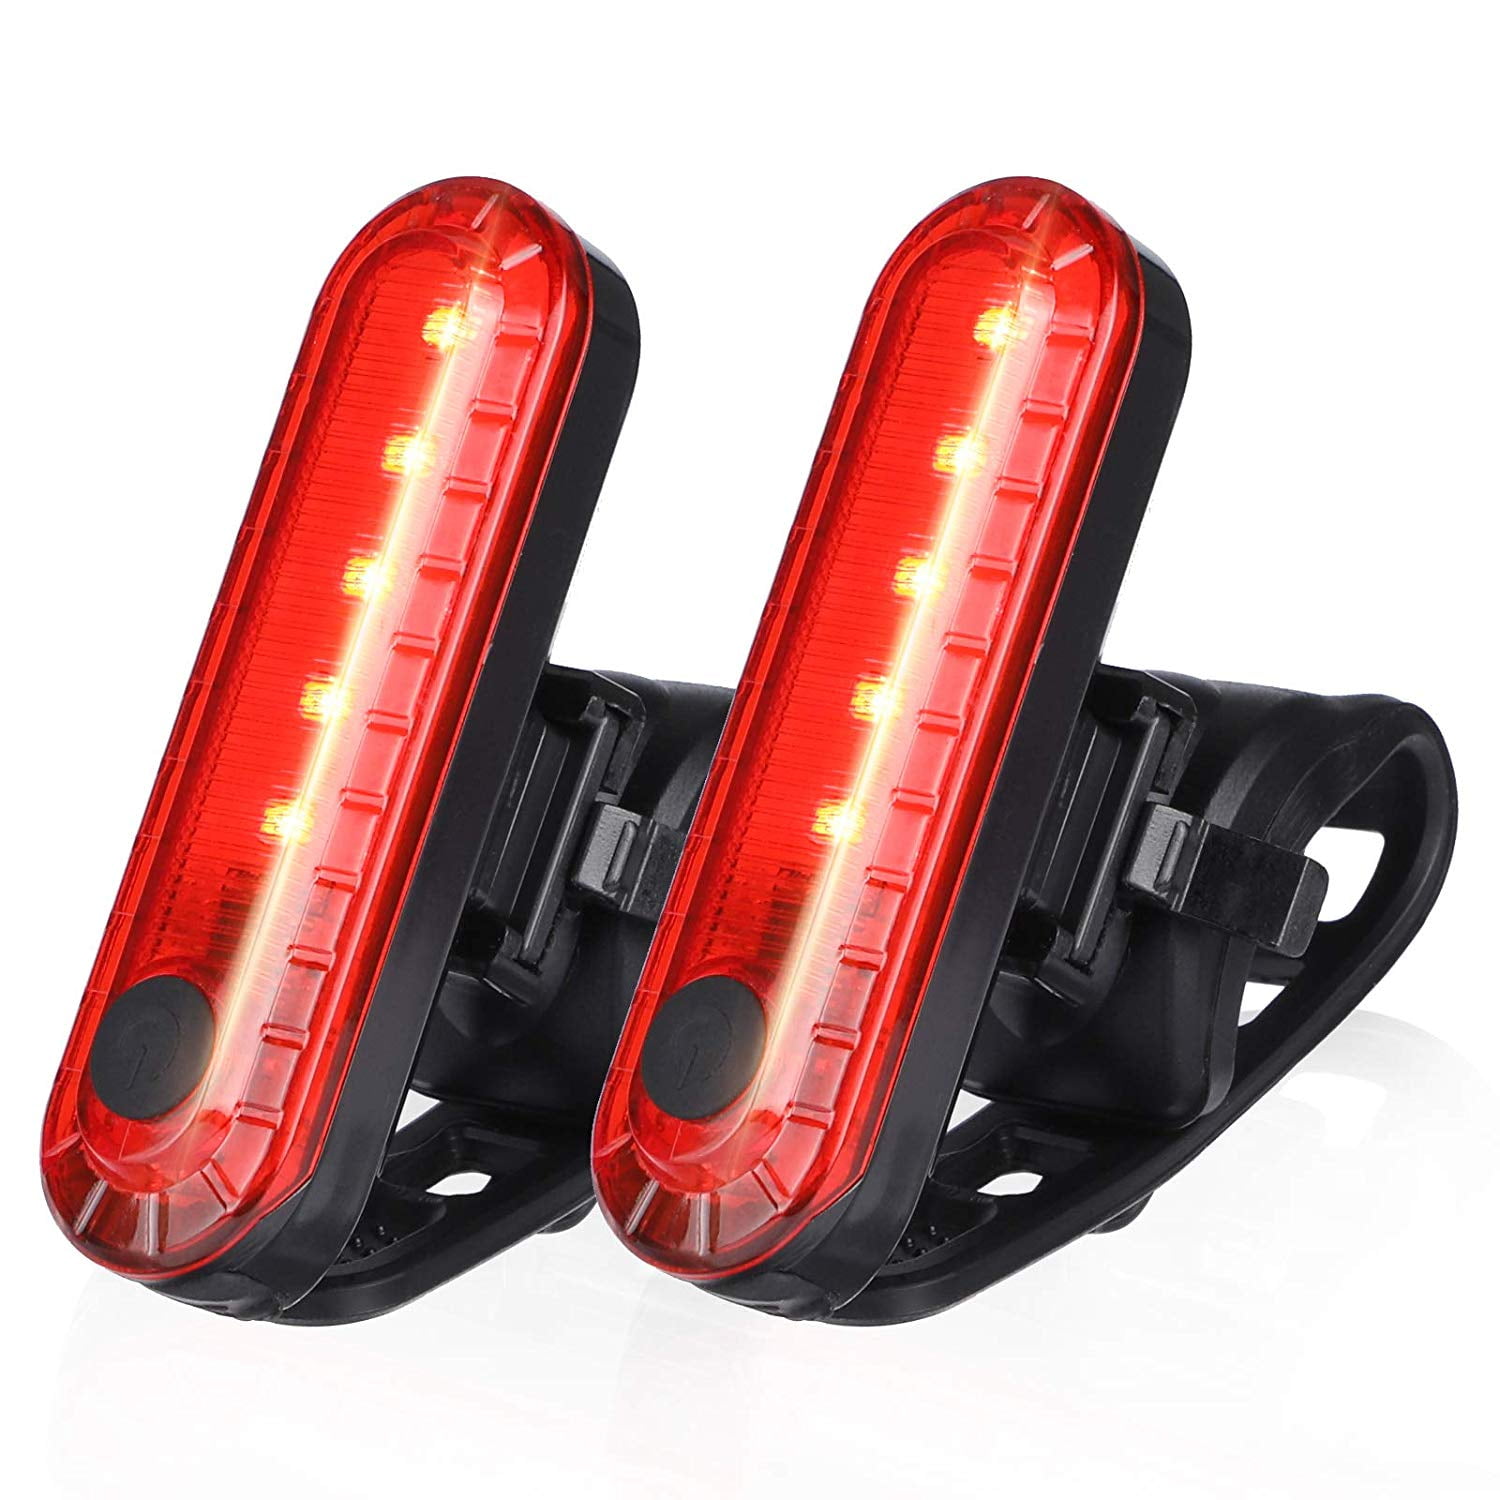 Bell Arella X50 USB Rechargeable Bicycle Tail Light 30 Lumens Safety Flashlight 